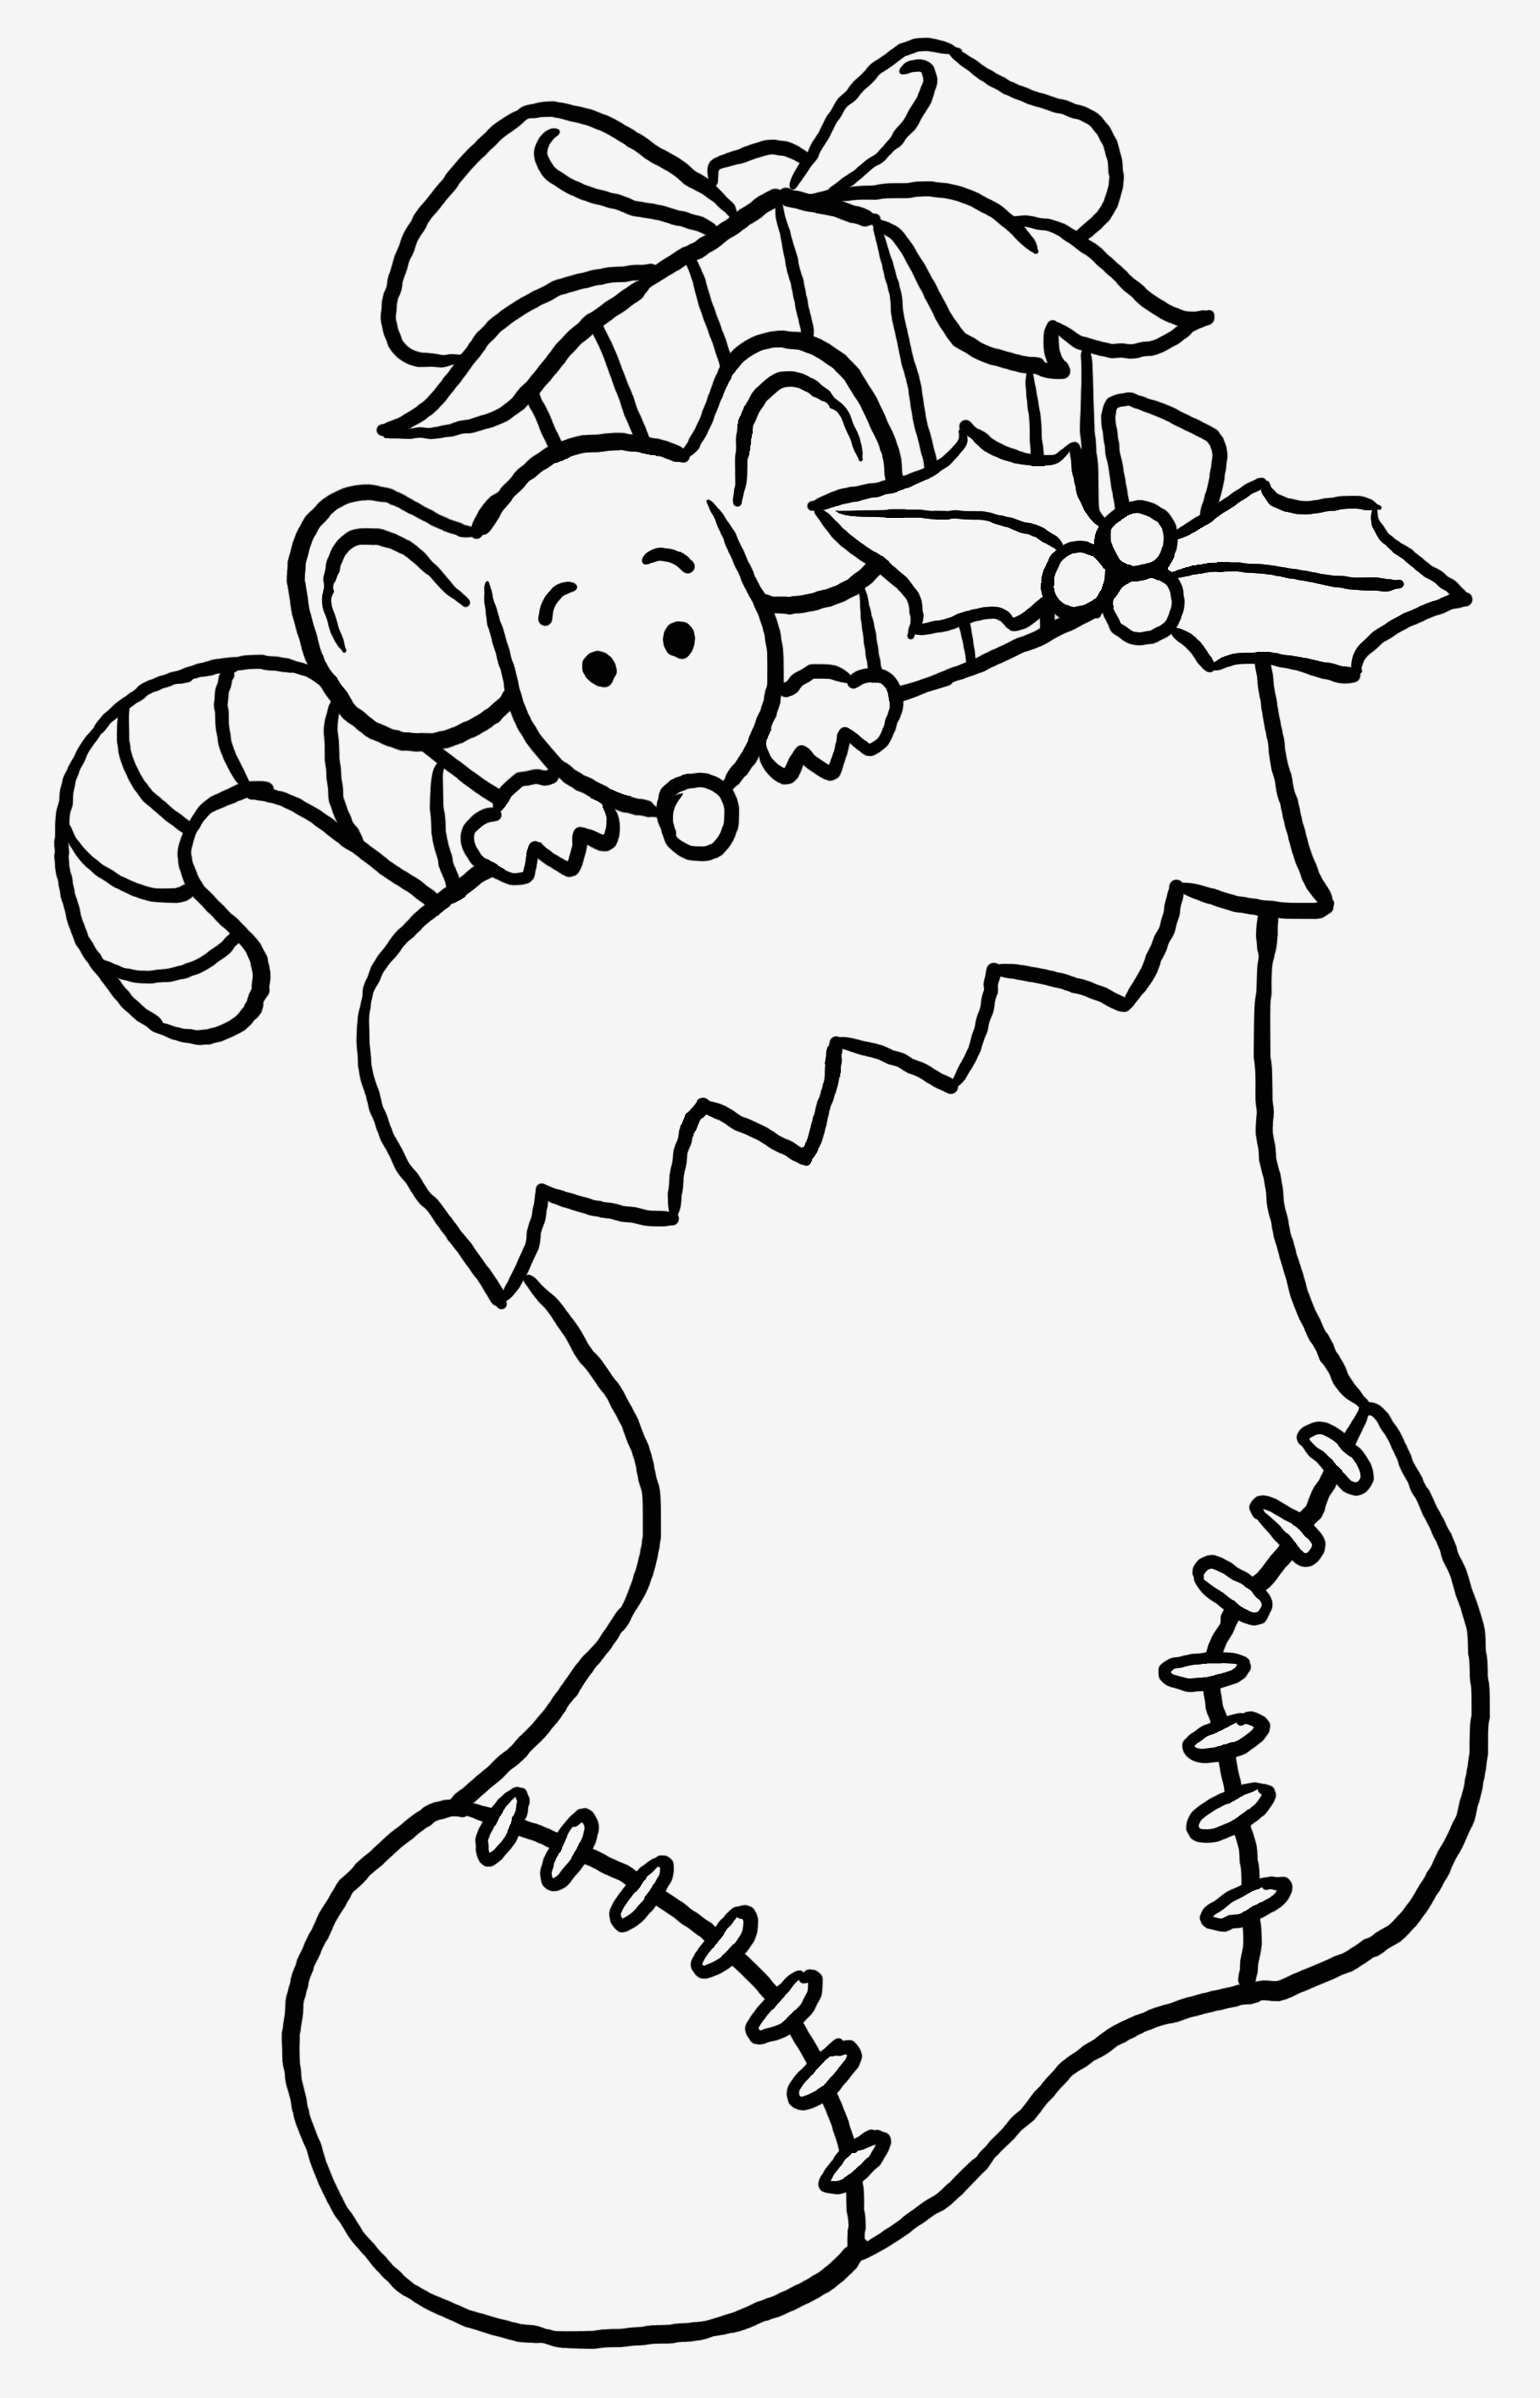 Coloring Pages: Easy Coloring Christmas Printable For Kids Simple - Free Printable Christmas Cards To Color